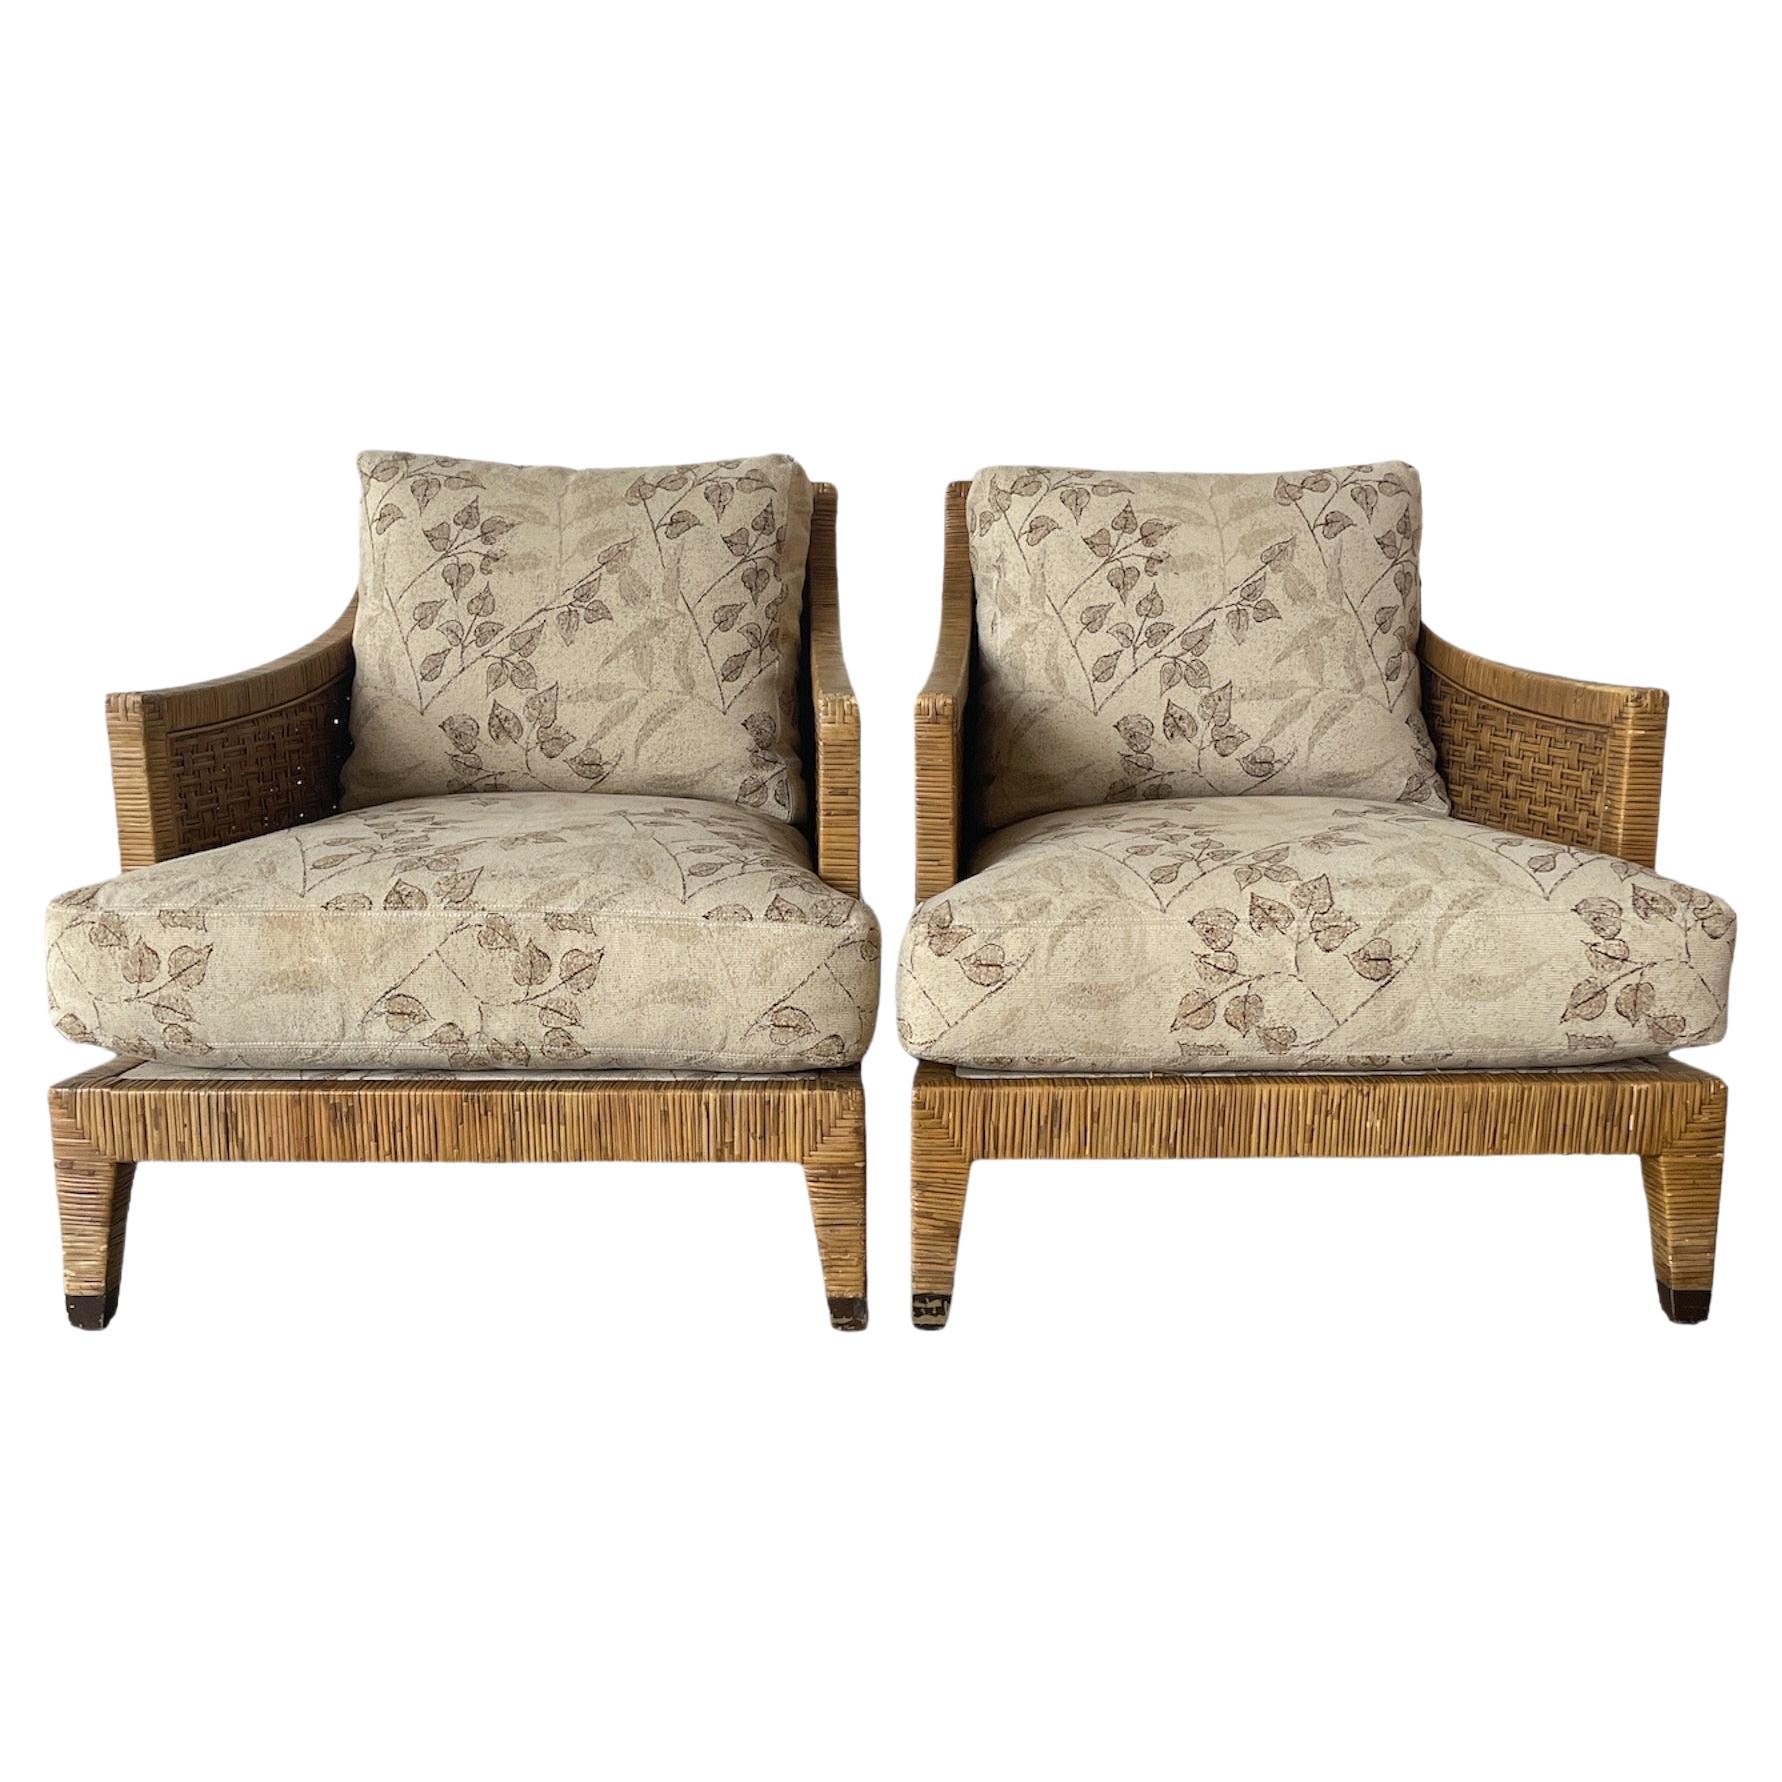 McGuire St. Germain Rattan Lounge Chairs For Sale